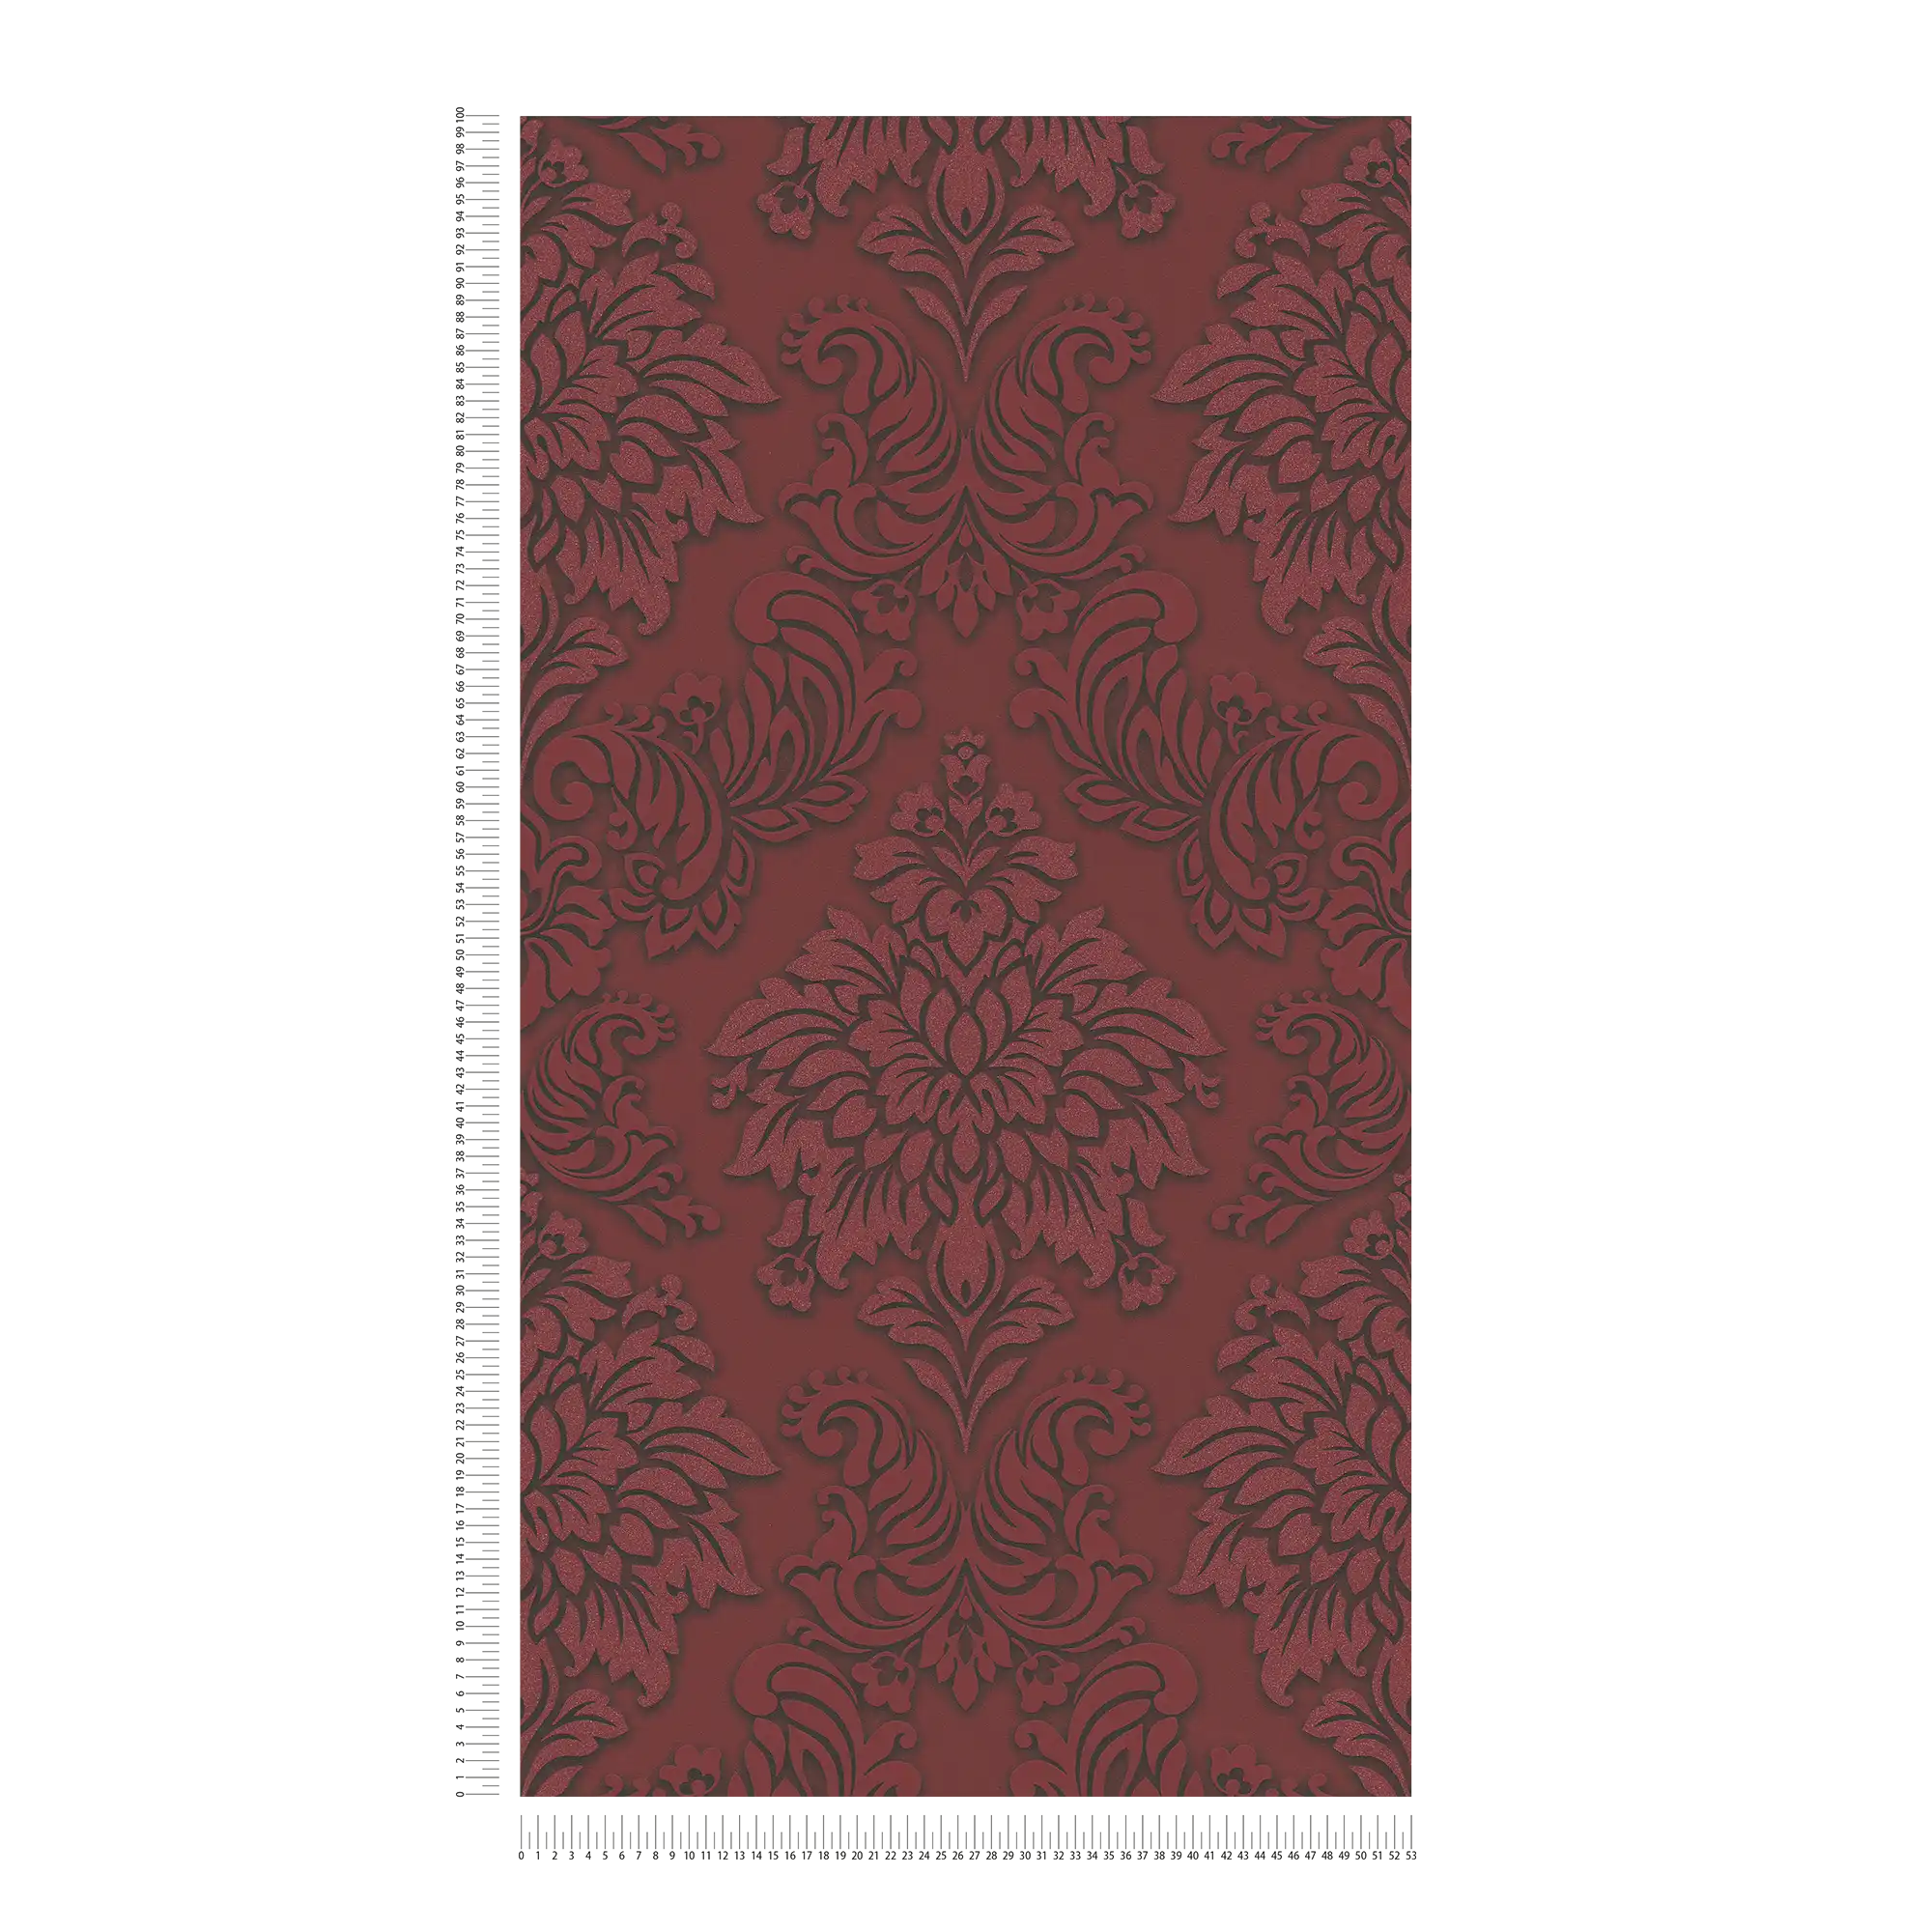             Baroque wallpaper ornaments with glitter effect - red, silver, black
        